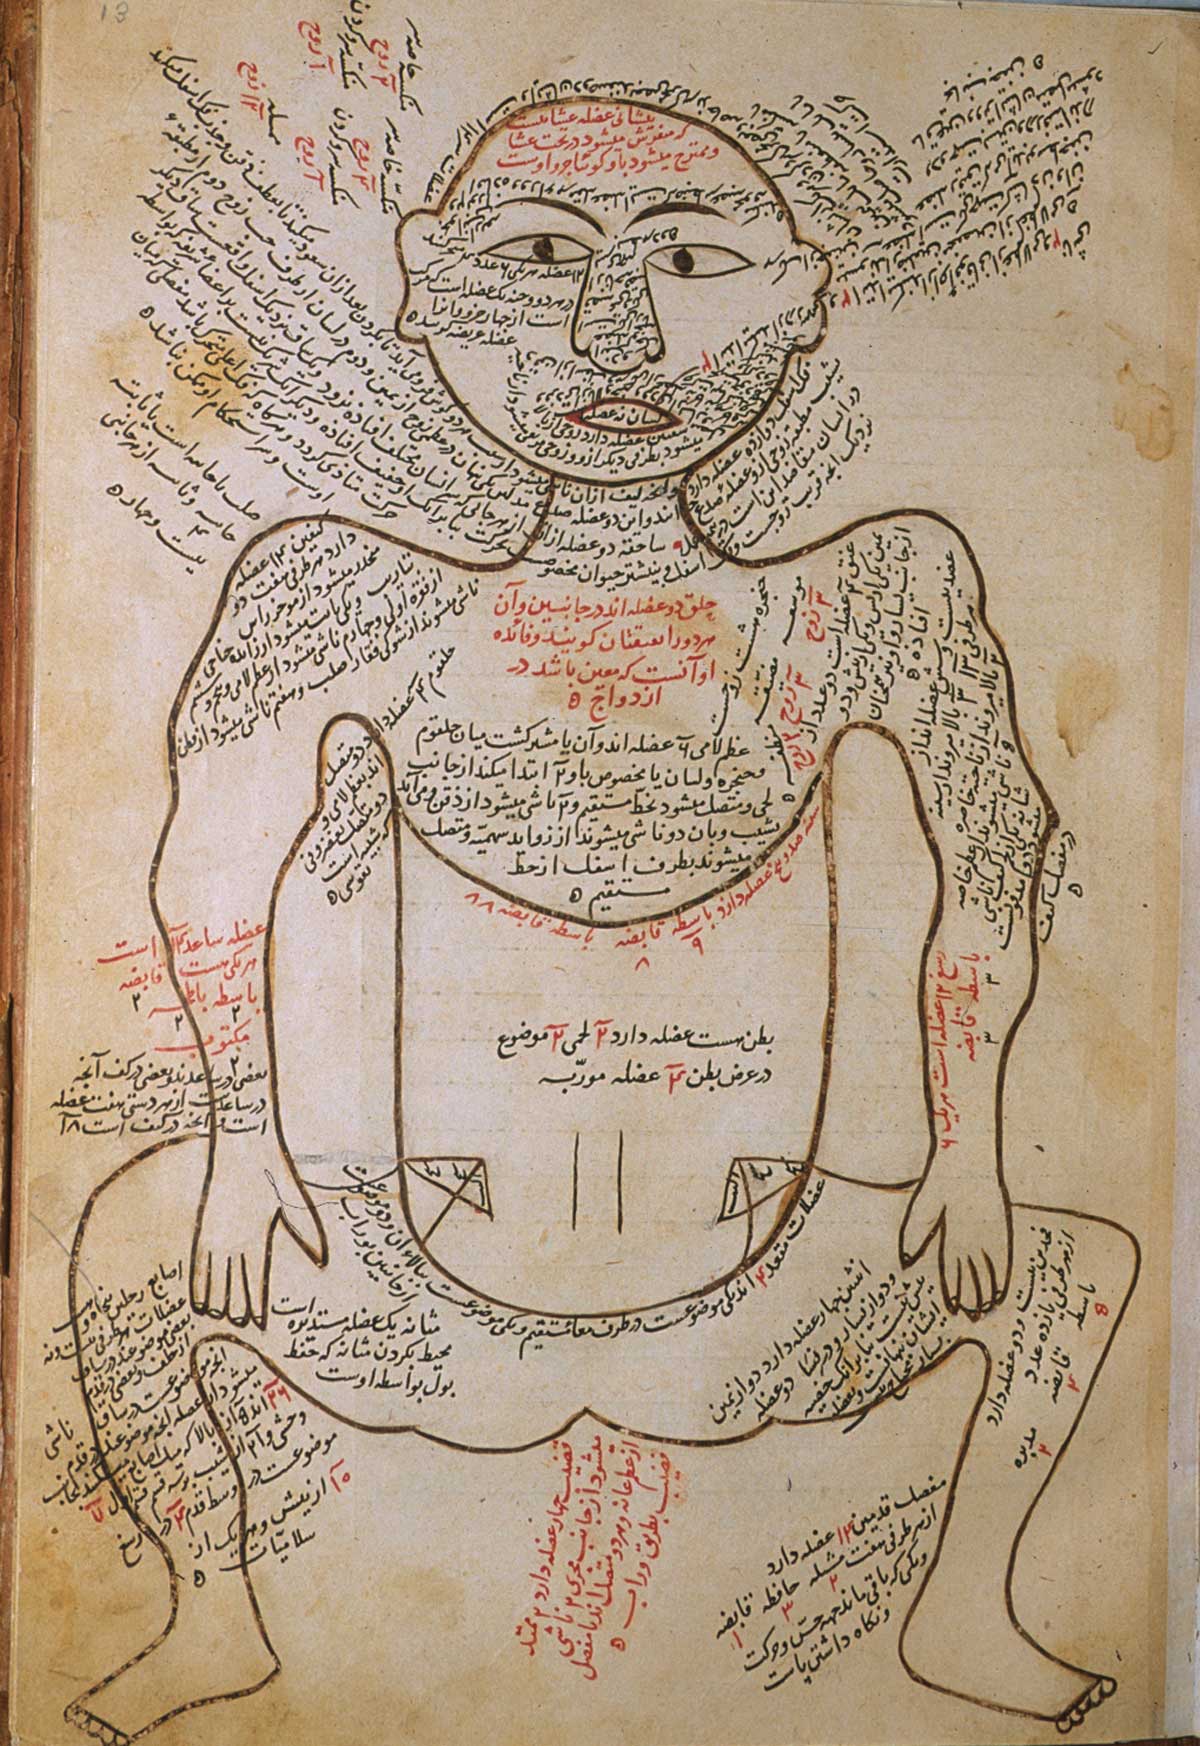 Folio 13a of Mansur ibn Ilyas' Tashrih-i badan-i insan, featuring the muscle figure, shown frontally, with extensive captions describing the muscles.